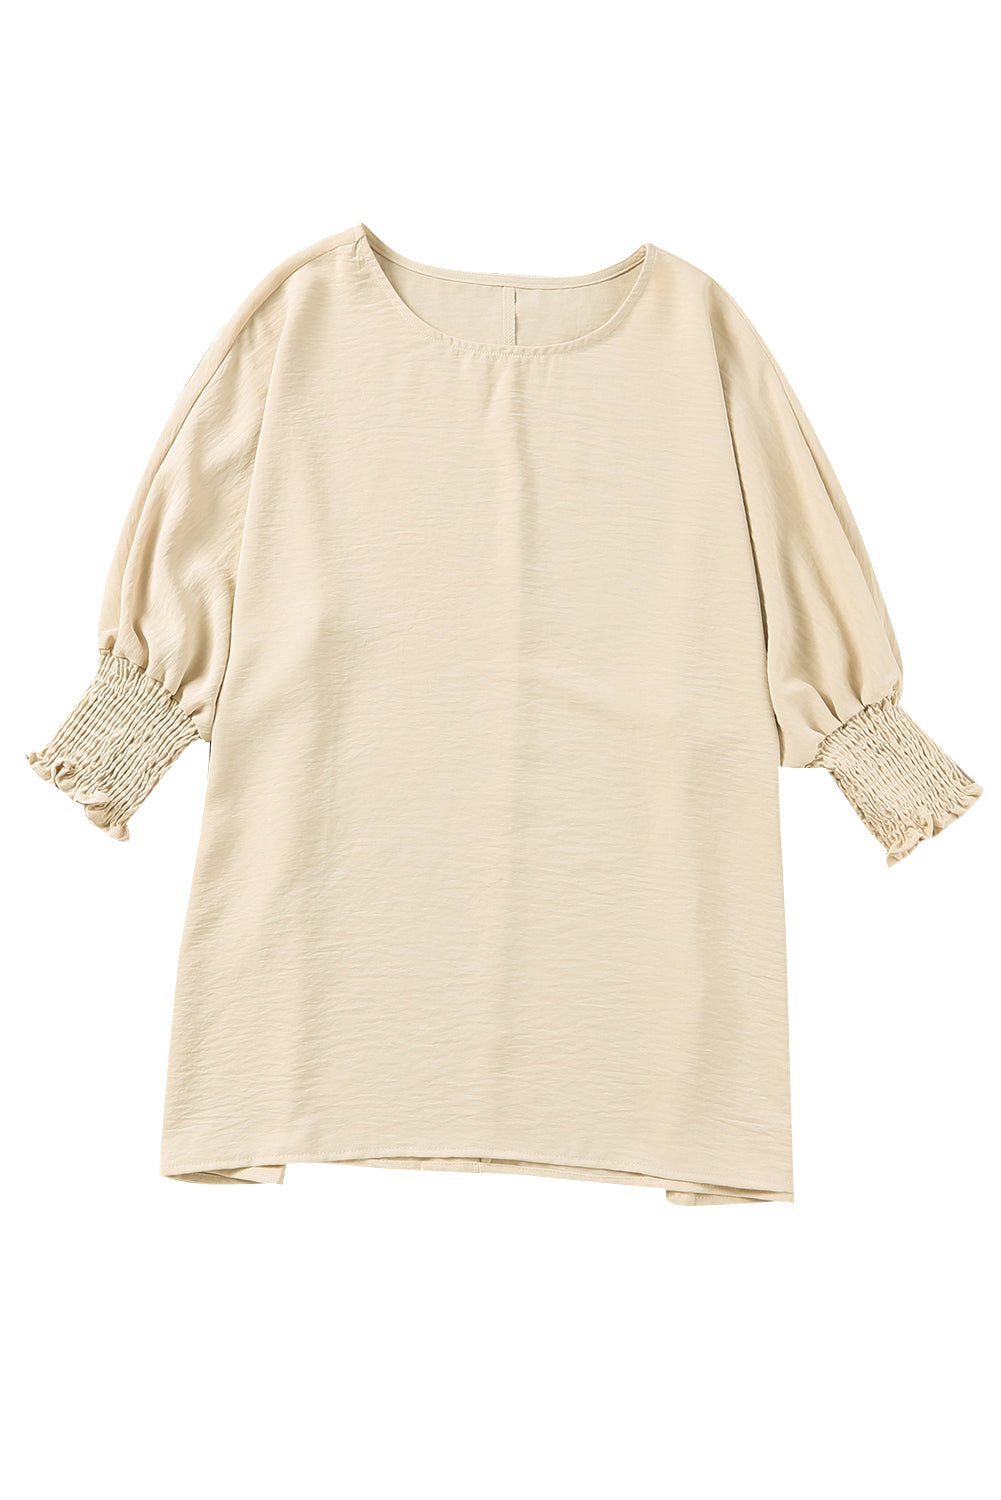 Apricot Solid Casual Smocked Cuffs Batwing Sleeve Blouse